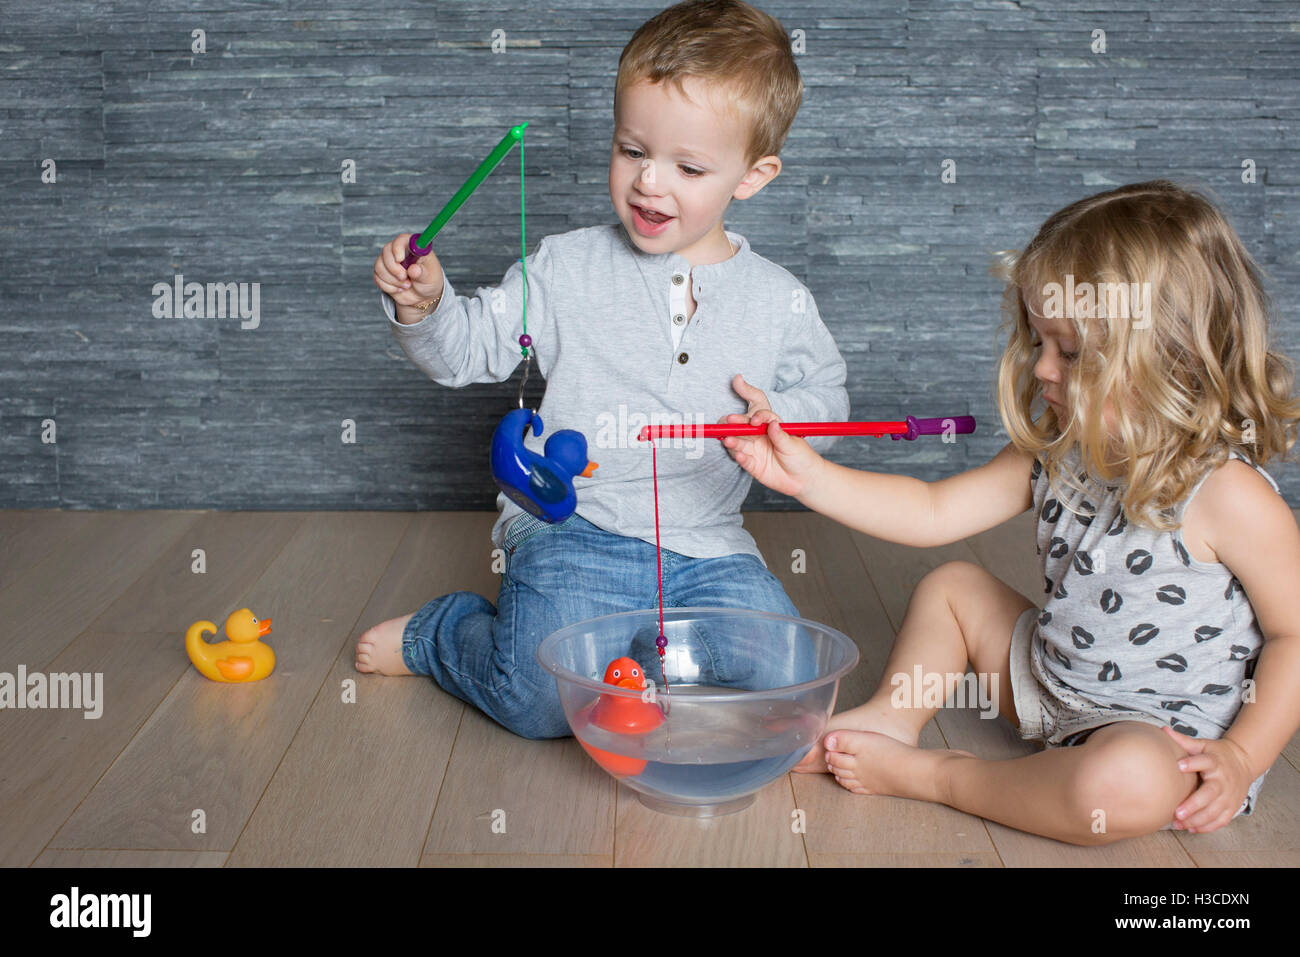 Children using toy fishing rods to catch rubber ducks floating in large bowl Stock Photo